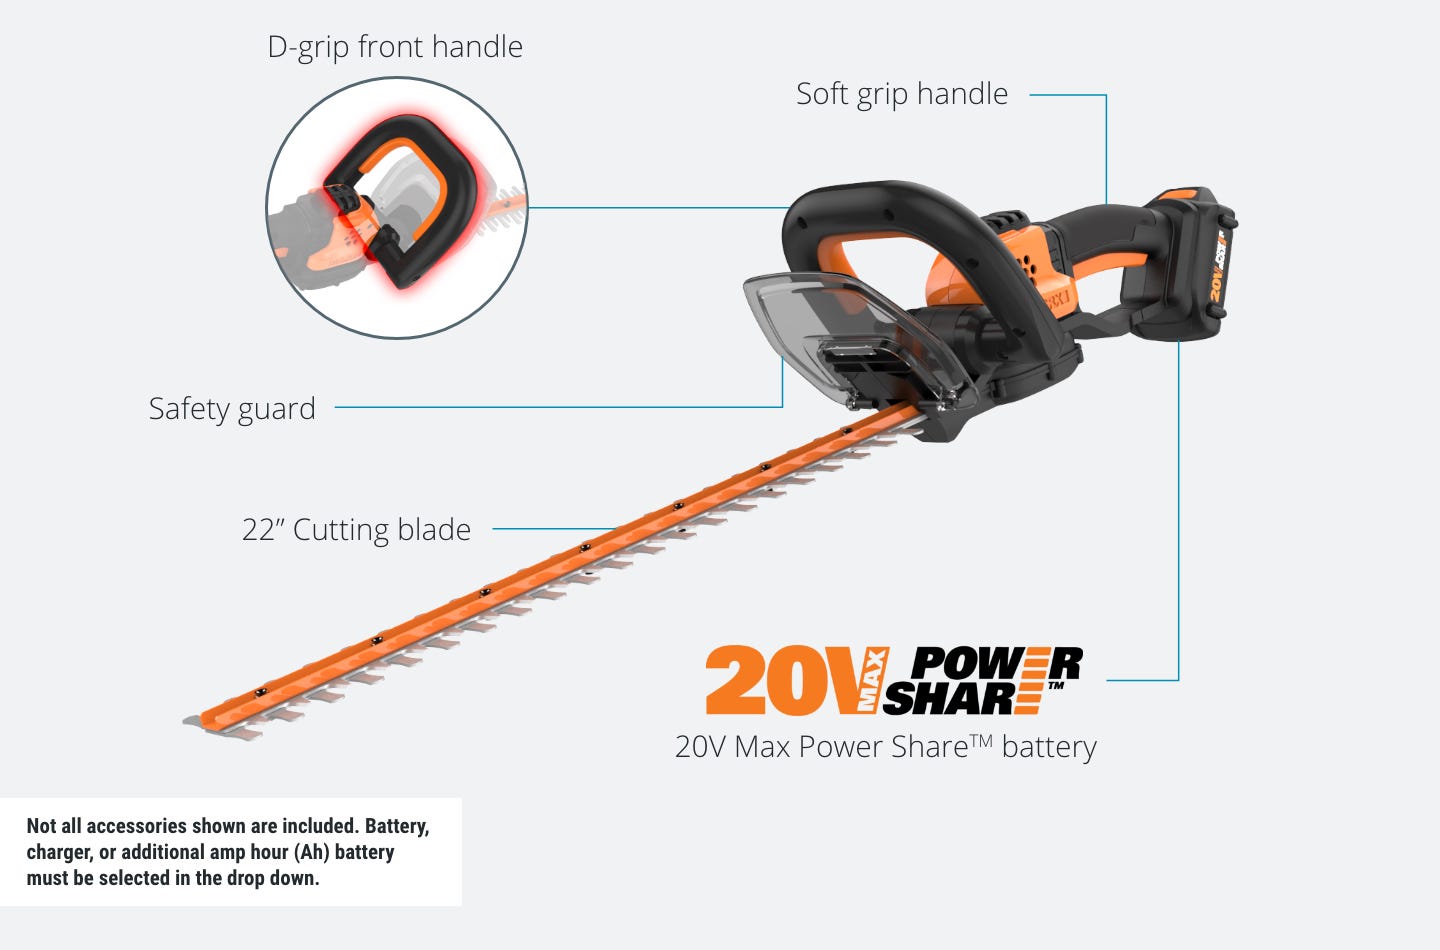 hedge trimmer: d-grip front handle, soft grip handle, safety guard, 22 inch cutting blade, 20 volt power share battery, not all accessories shown are included